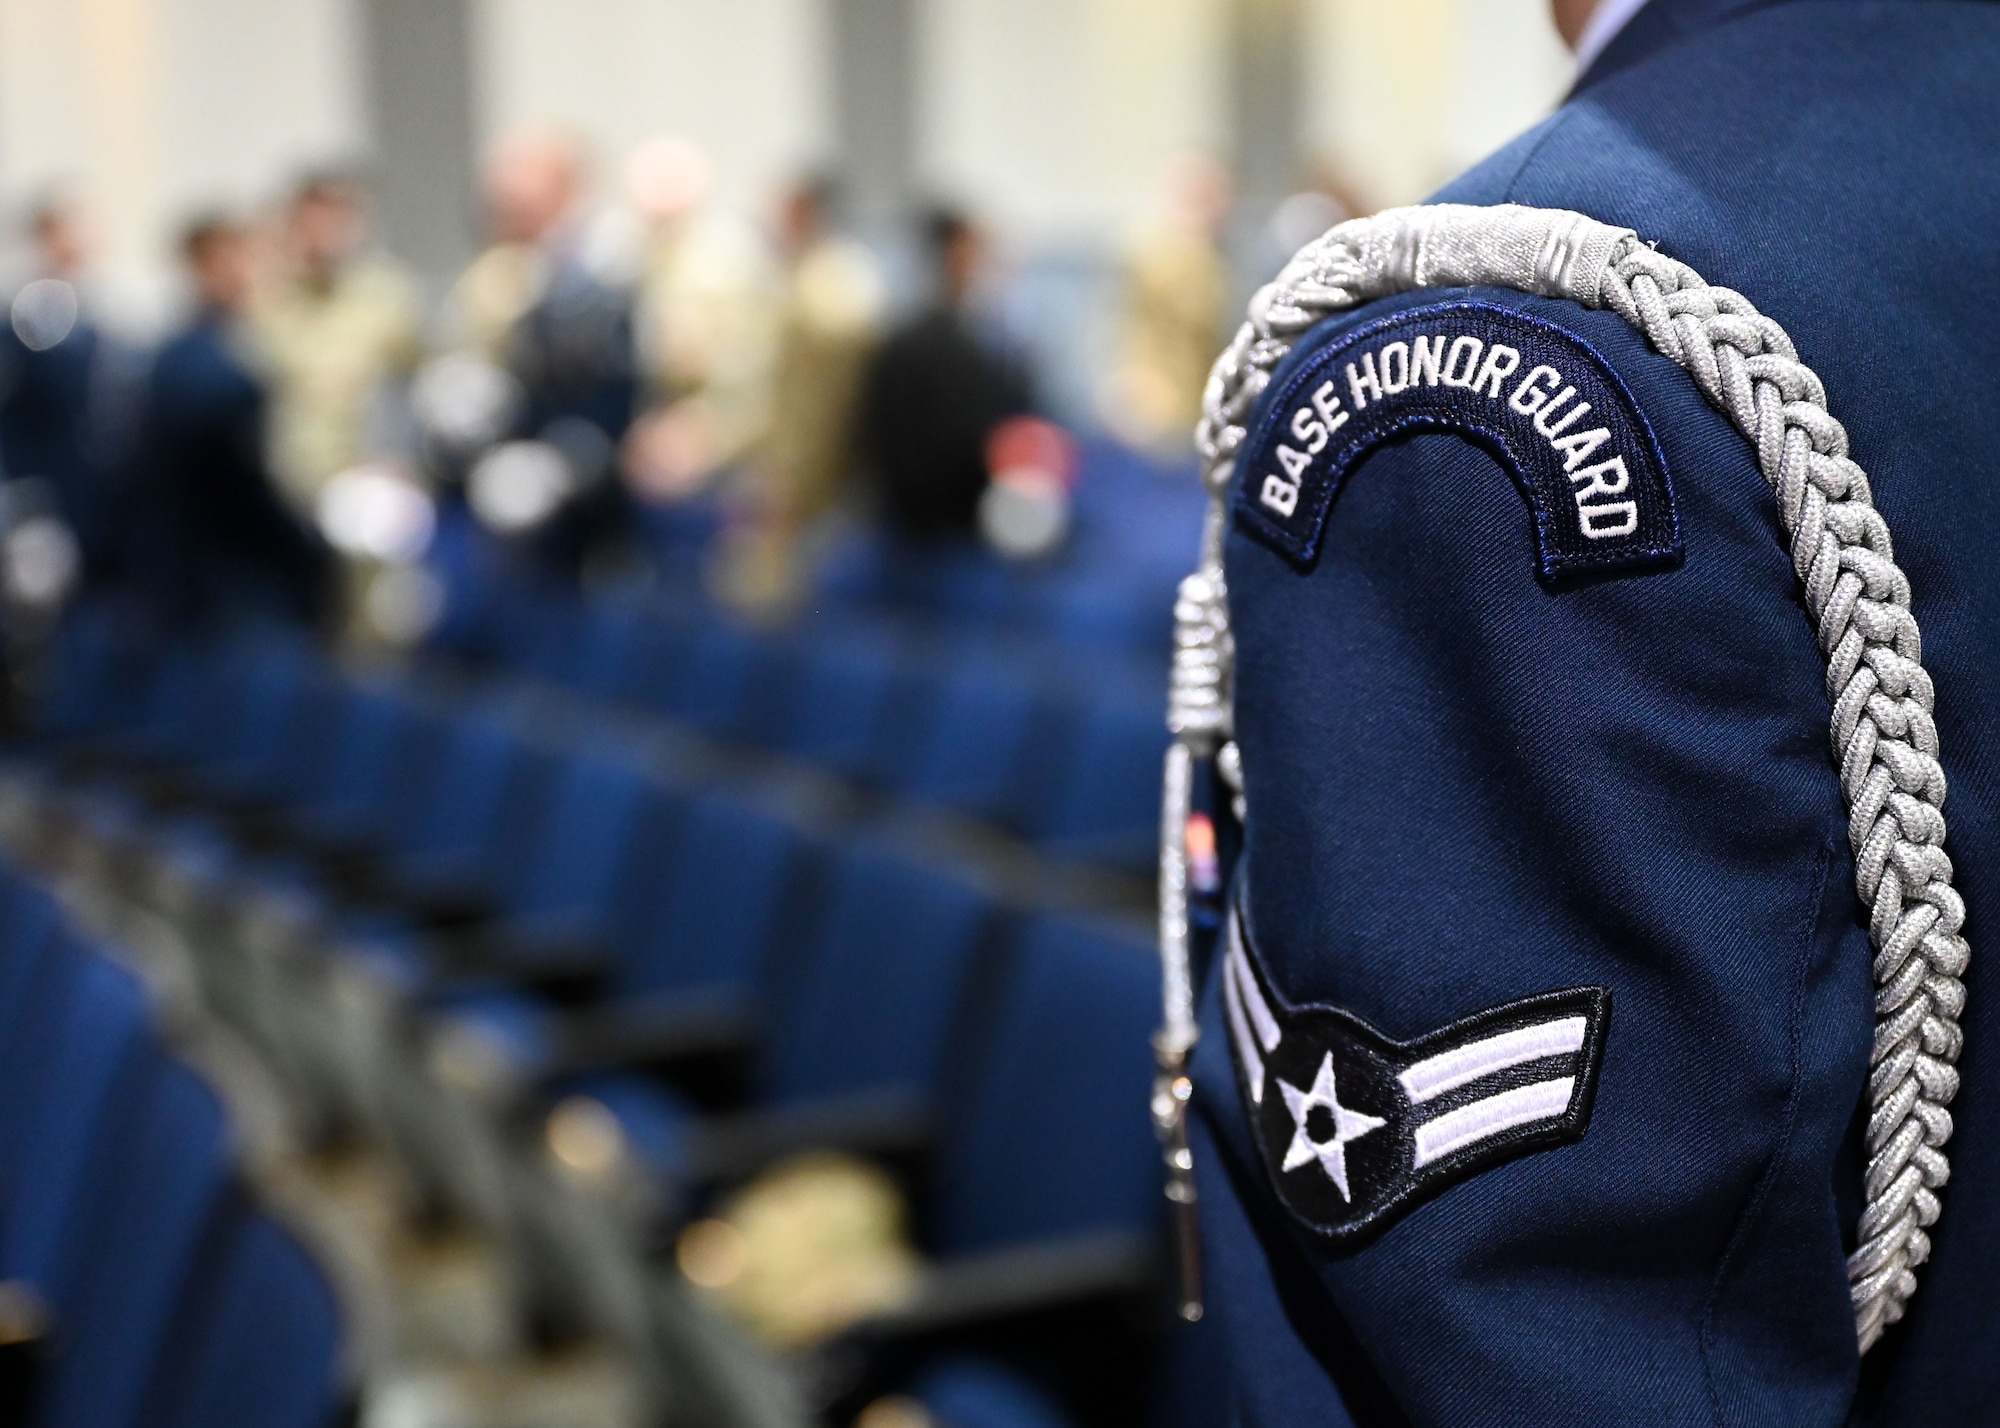 The Honor Guard held a Hail and Farewell ceremony recognizing the dedication and accomplishments of the 2023 bravo flight and welcome the incoming members of 2024 alpha flight.